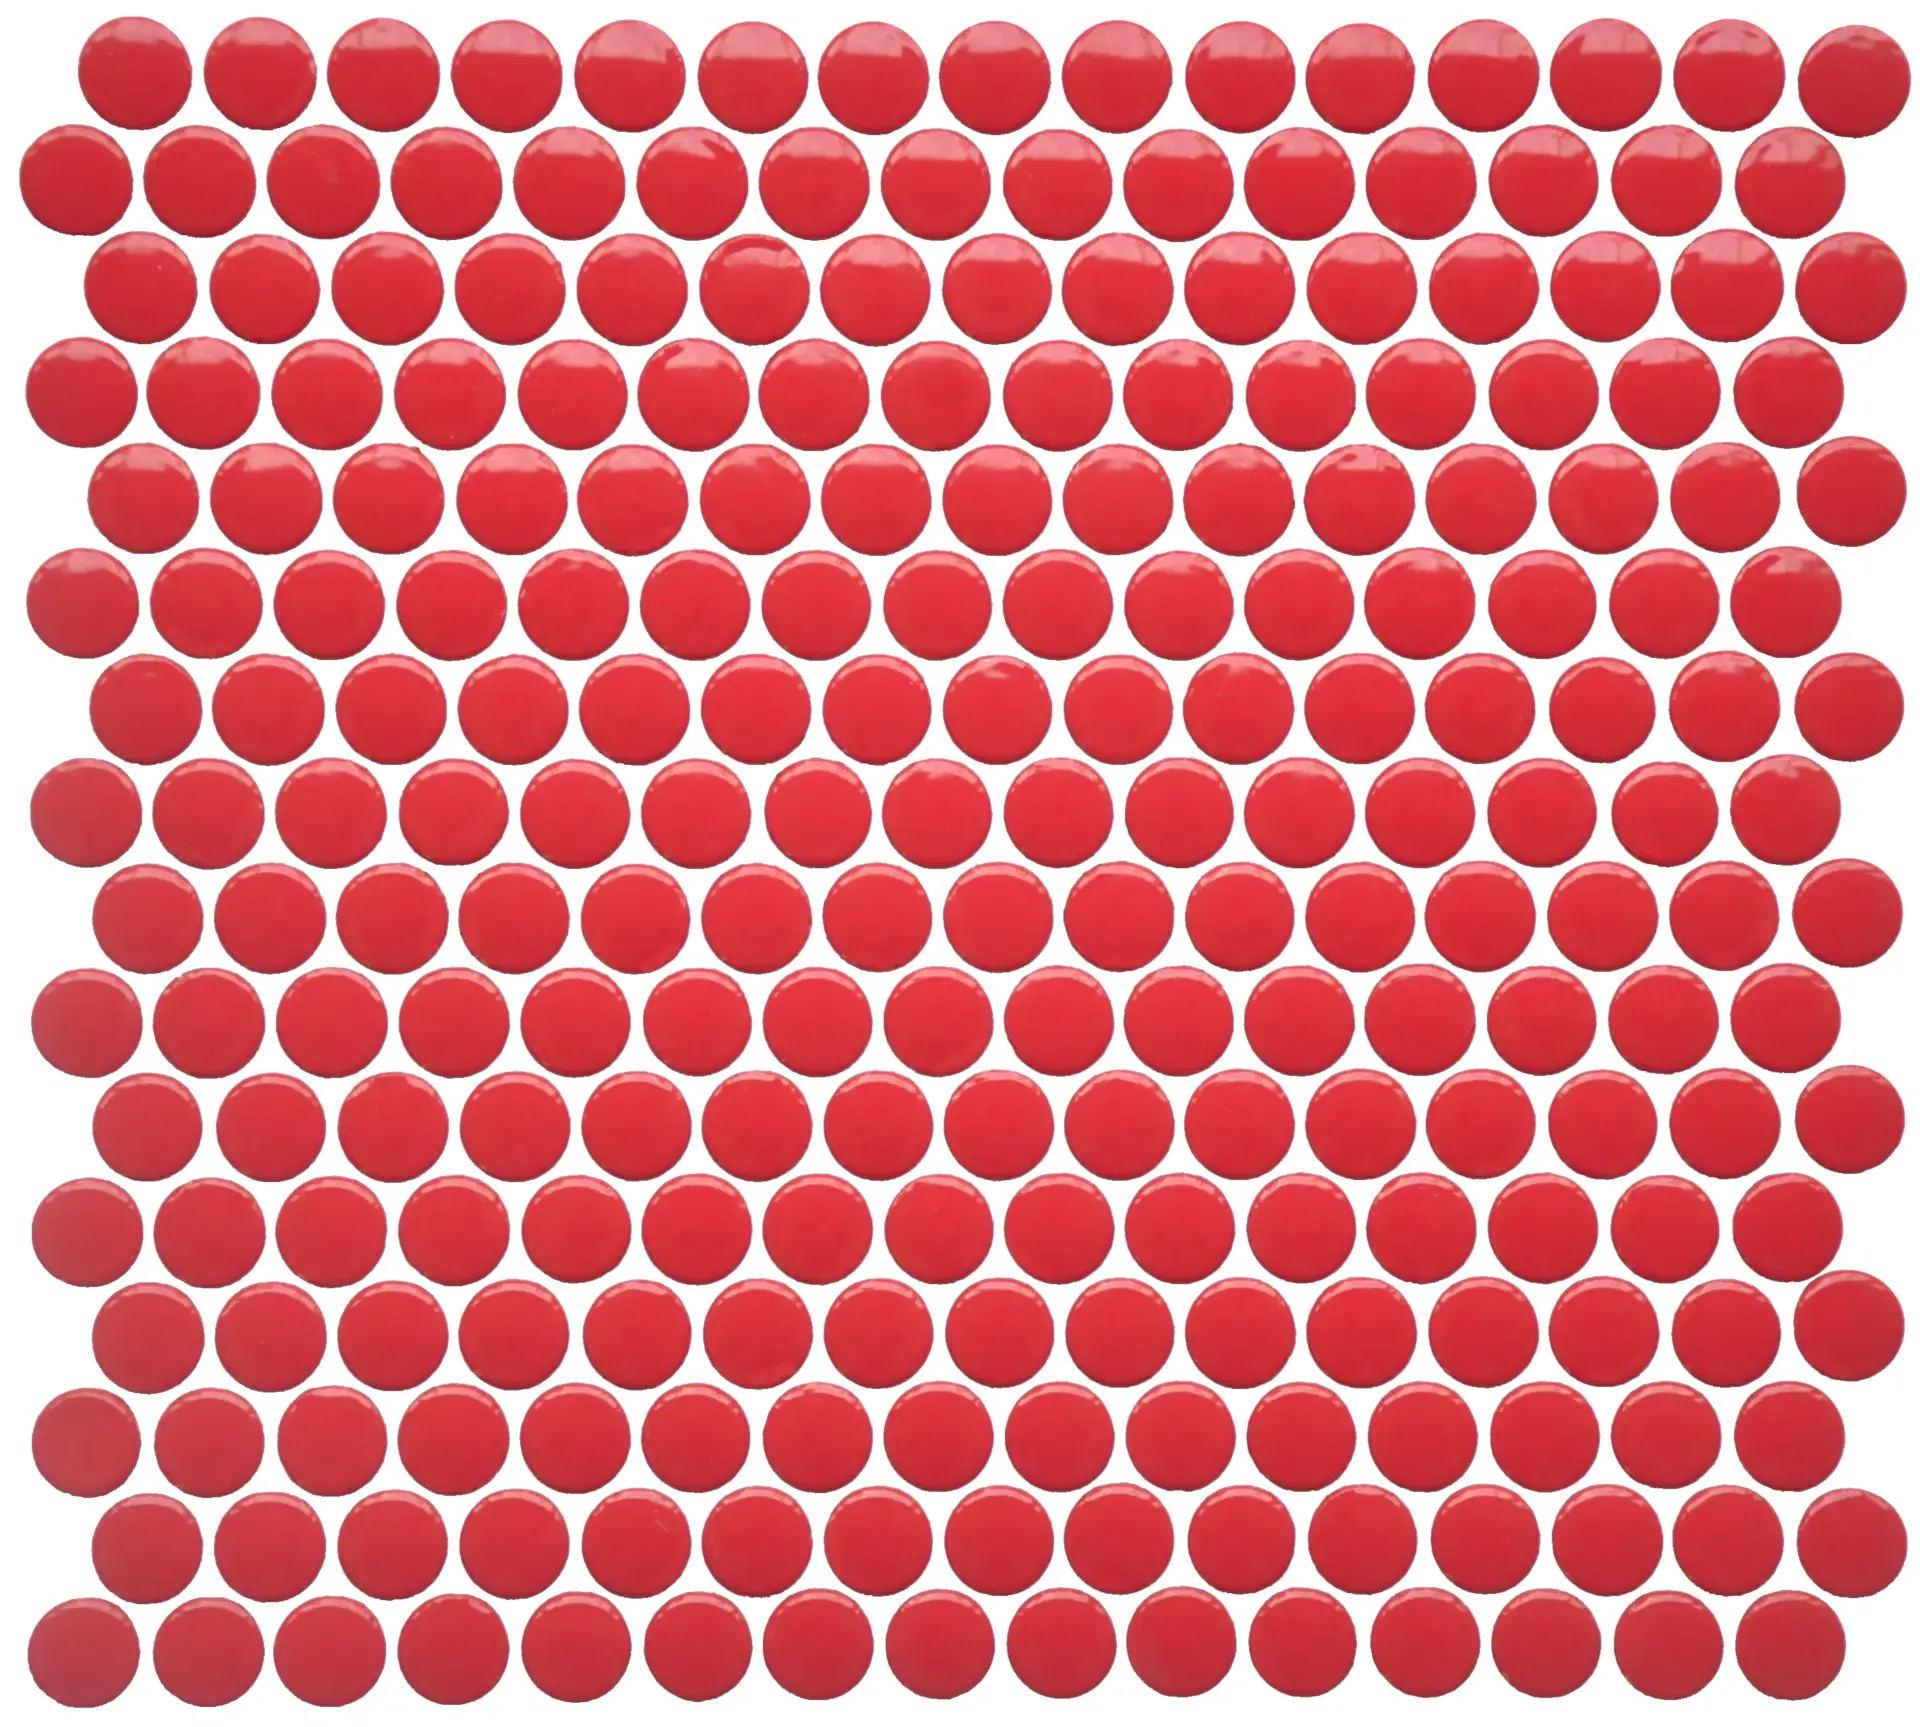 12X12 Bright Red Penny Round Mosaic